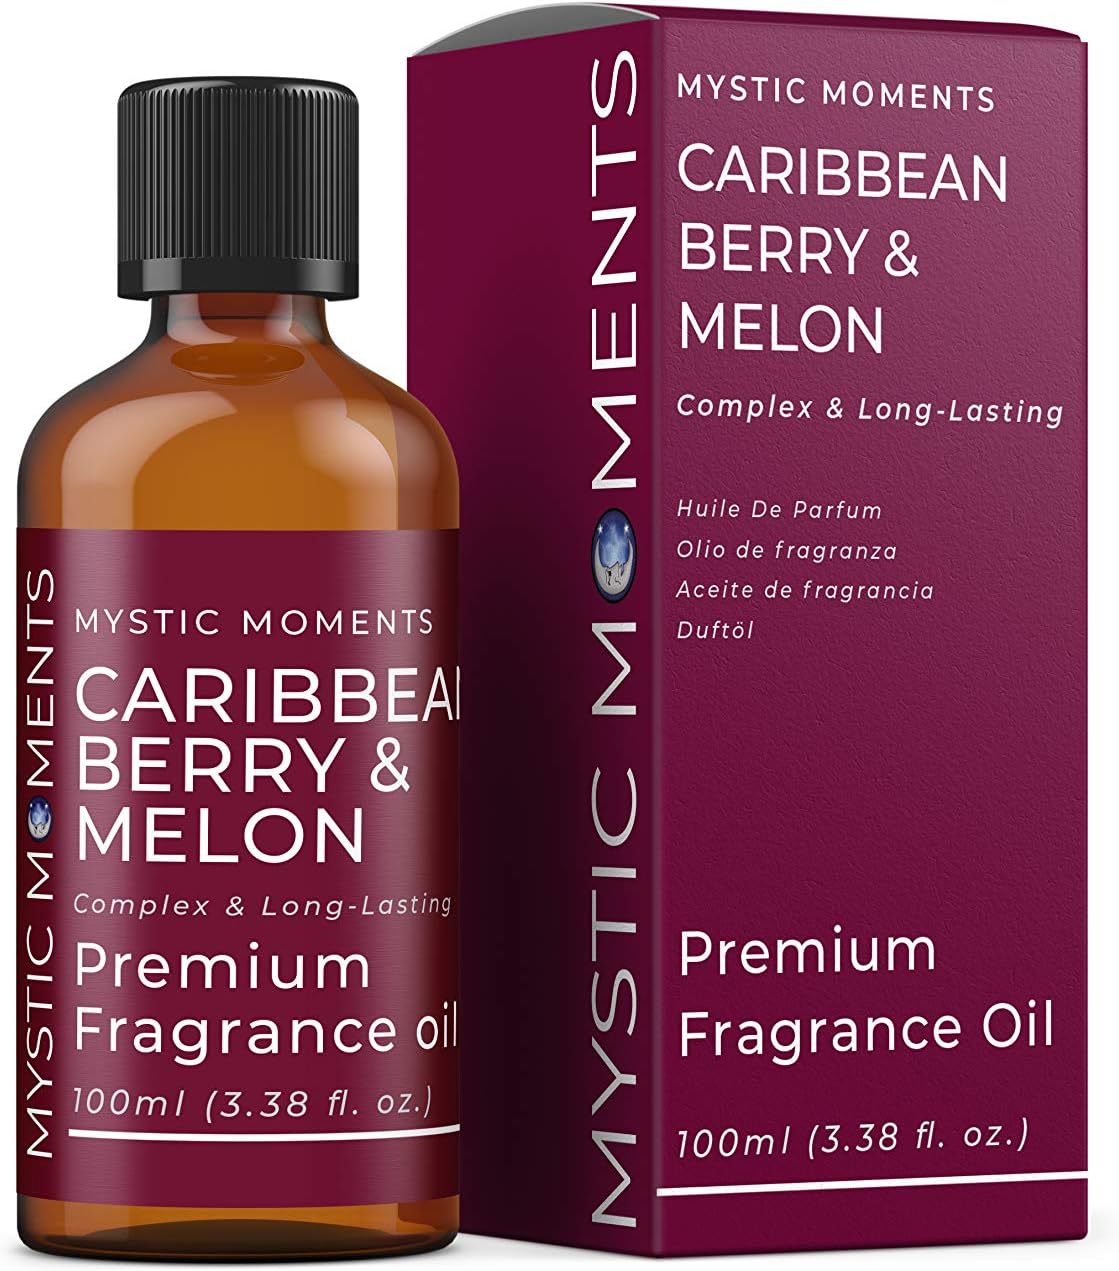 Mystic Moments | Caribbean Berry & Melon Fragrance Oil 100ml - Perfect for Soaps, Candles, Bath Bombs, Oil Burners, Diffusers and Skin & Hair Care Items